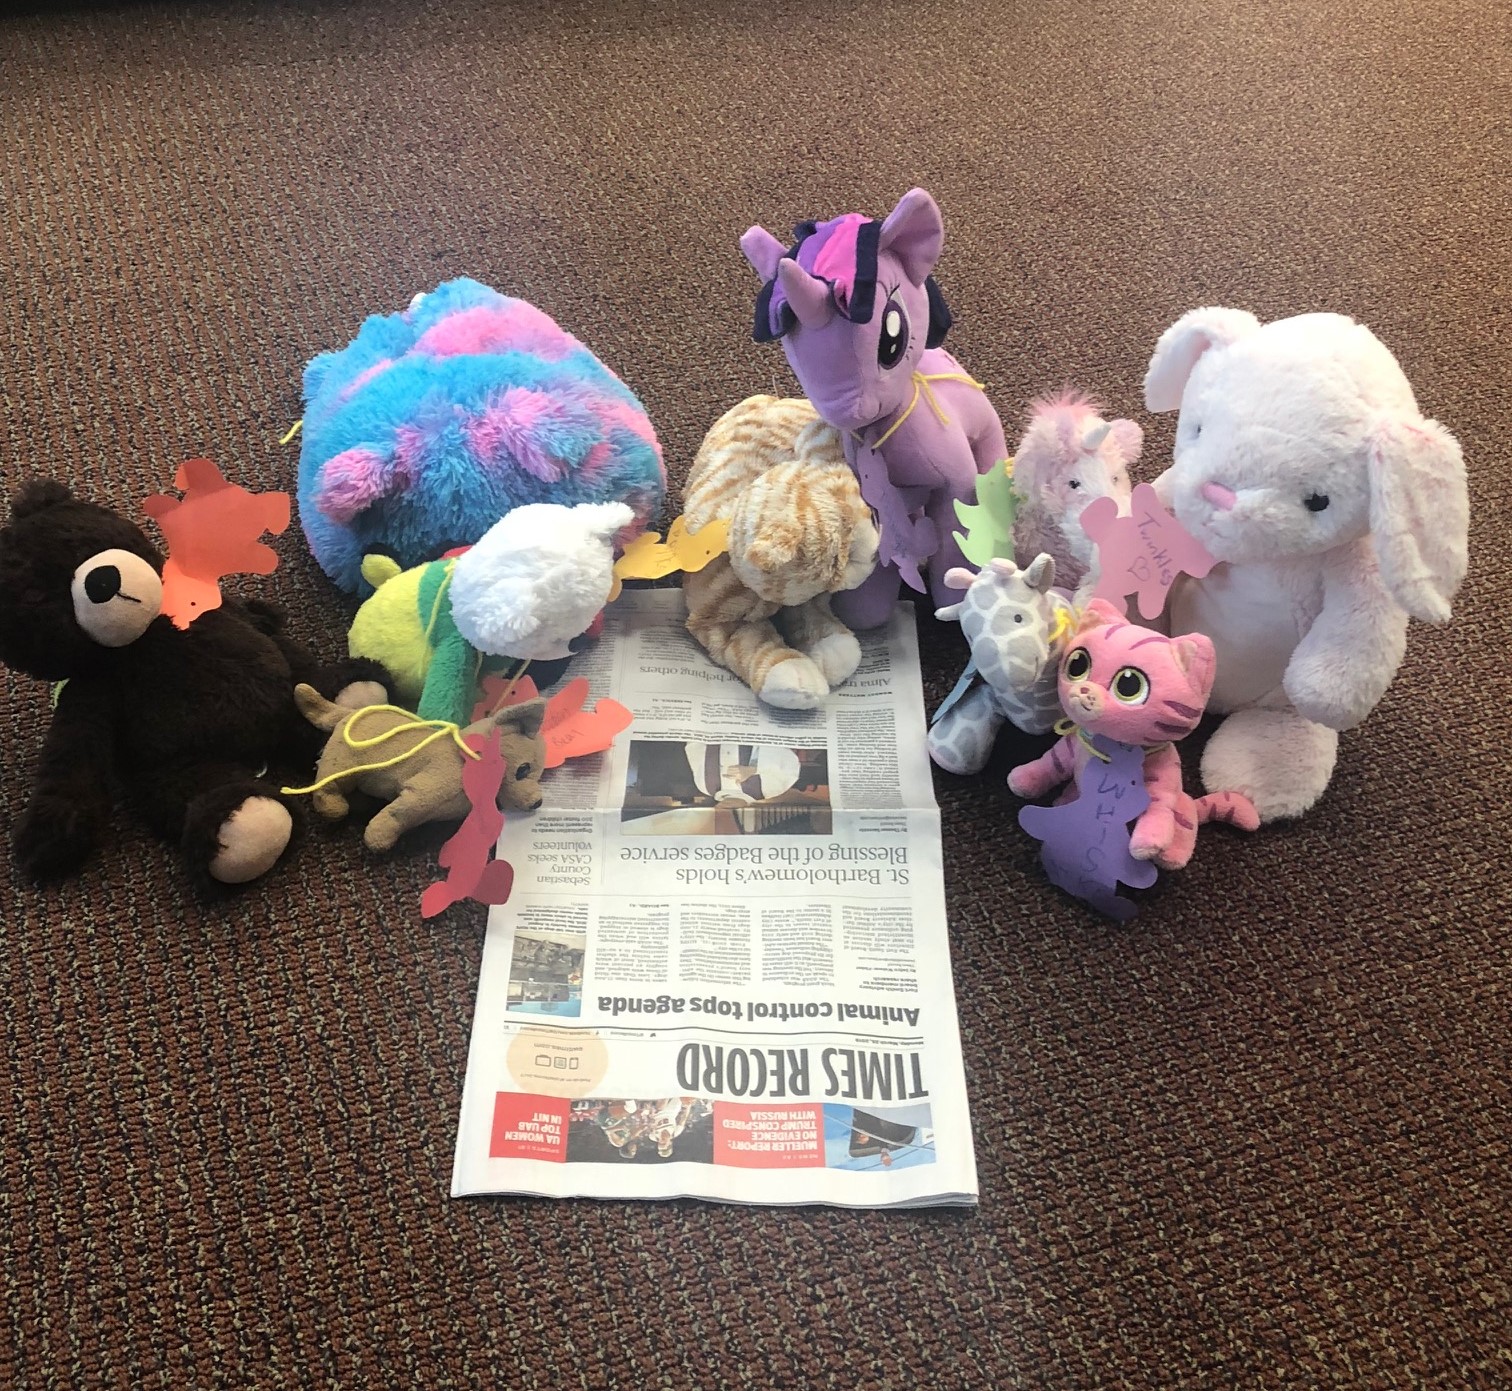 Stuffed animals reading the Times Record